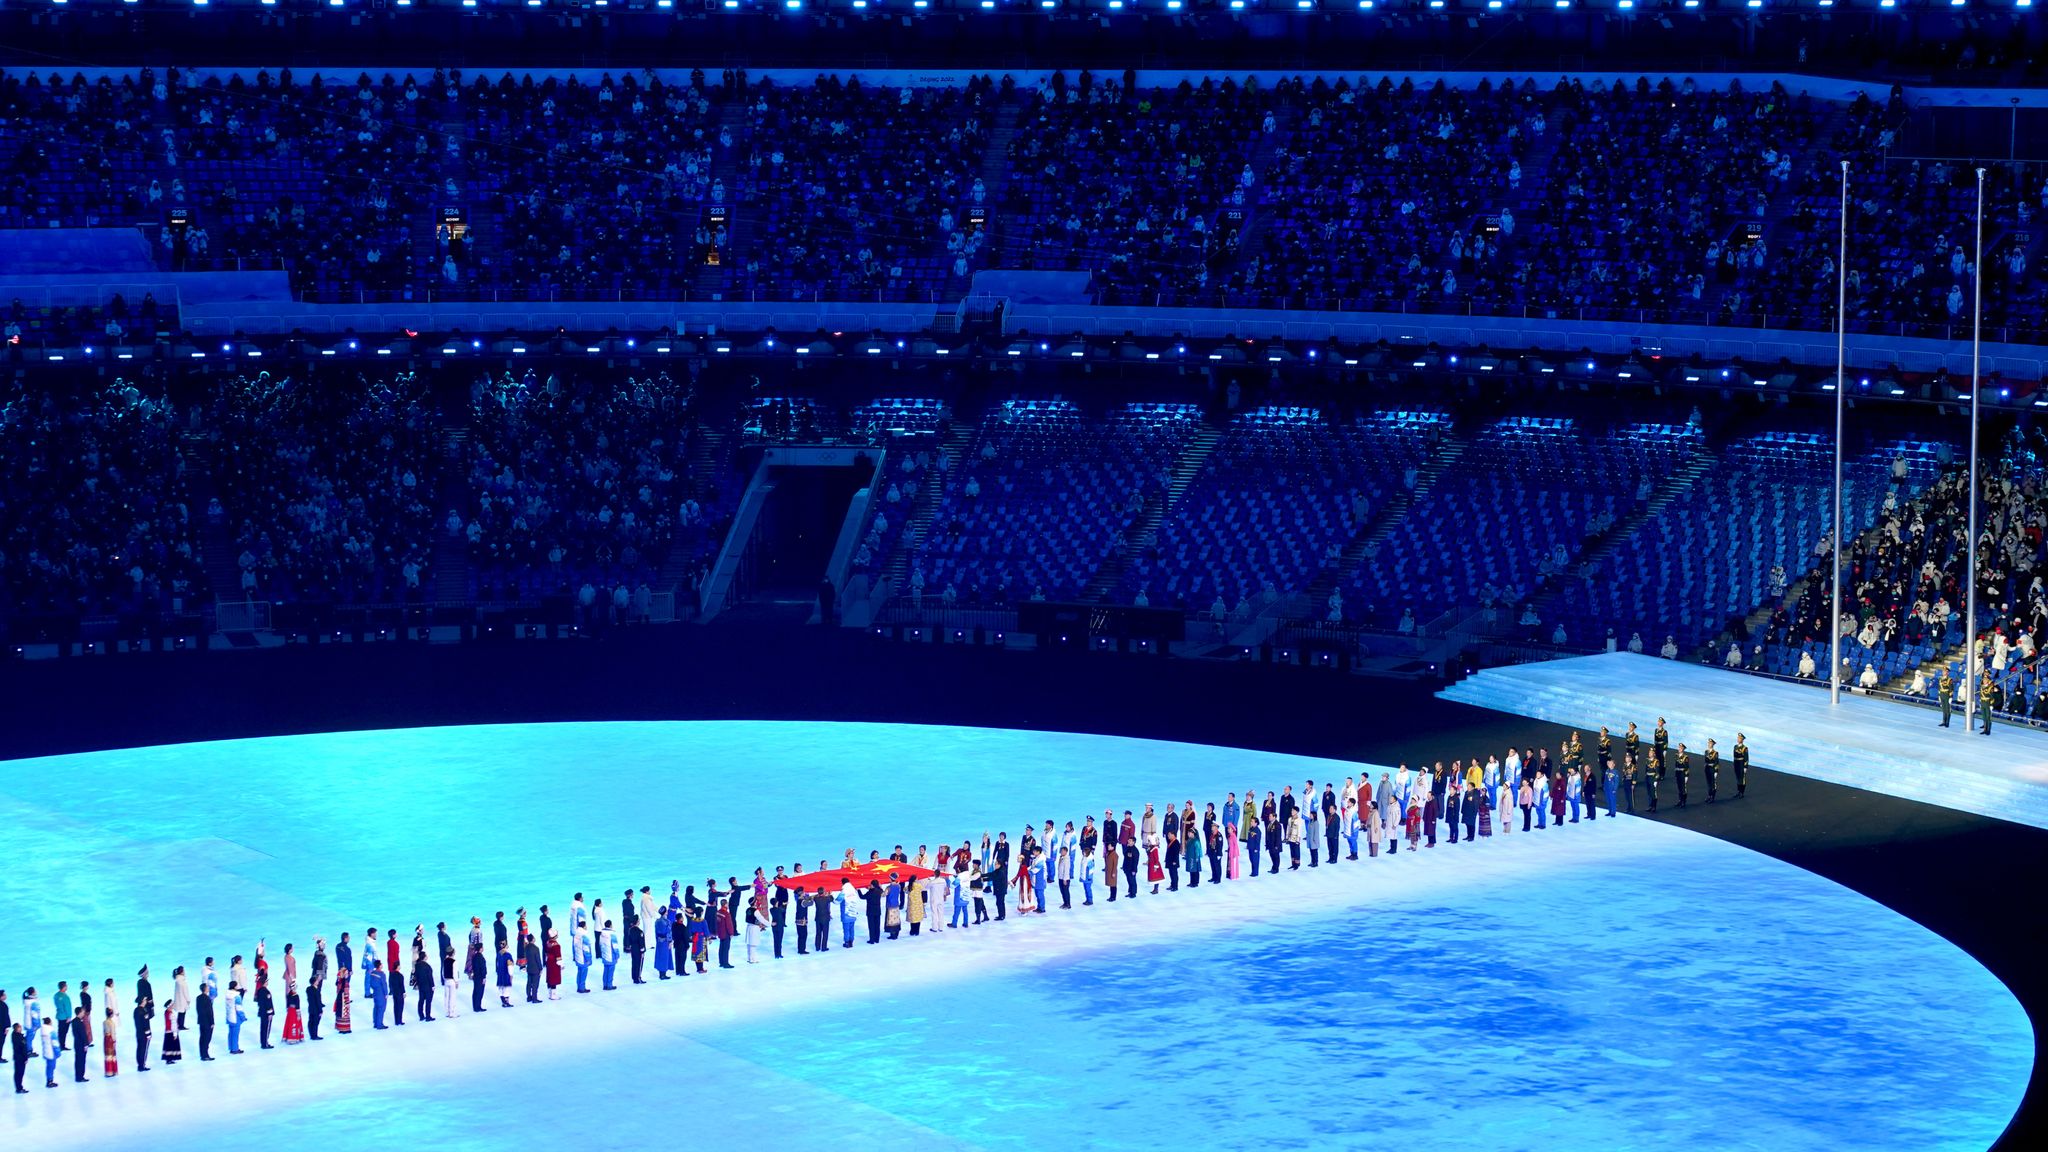 Winter Olympics opening ceremony in pictures - as skier from Uyghur ...